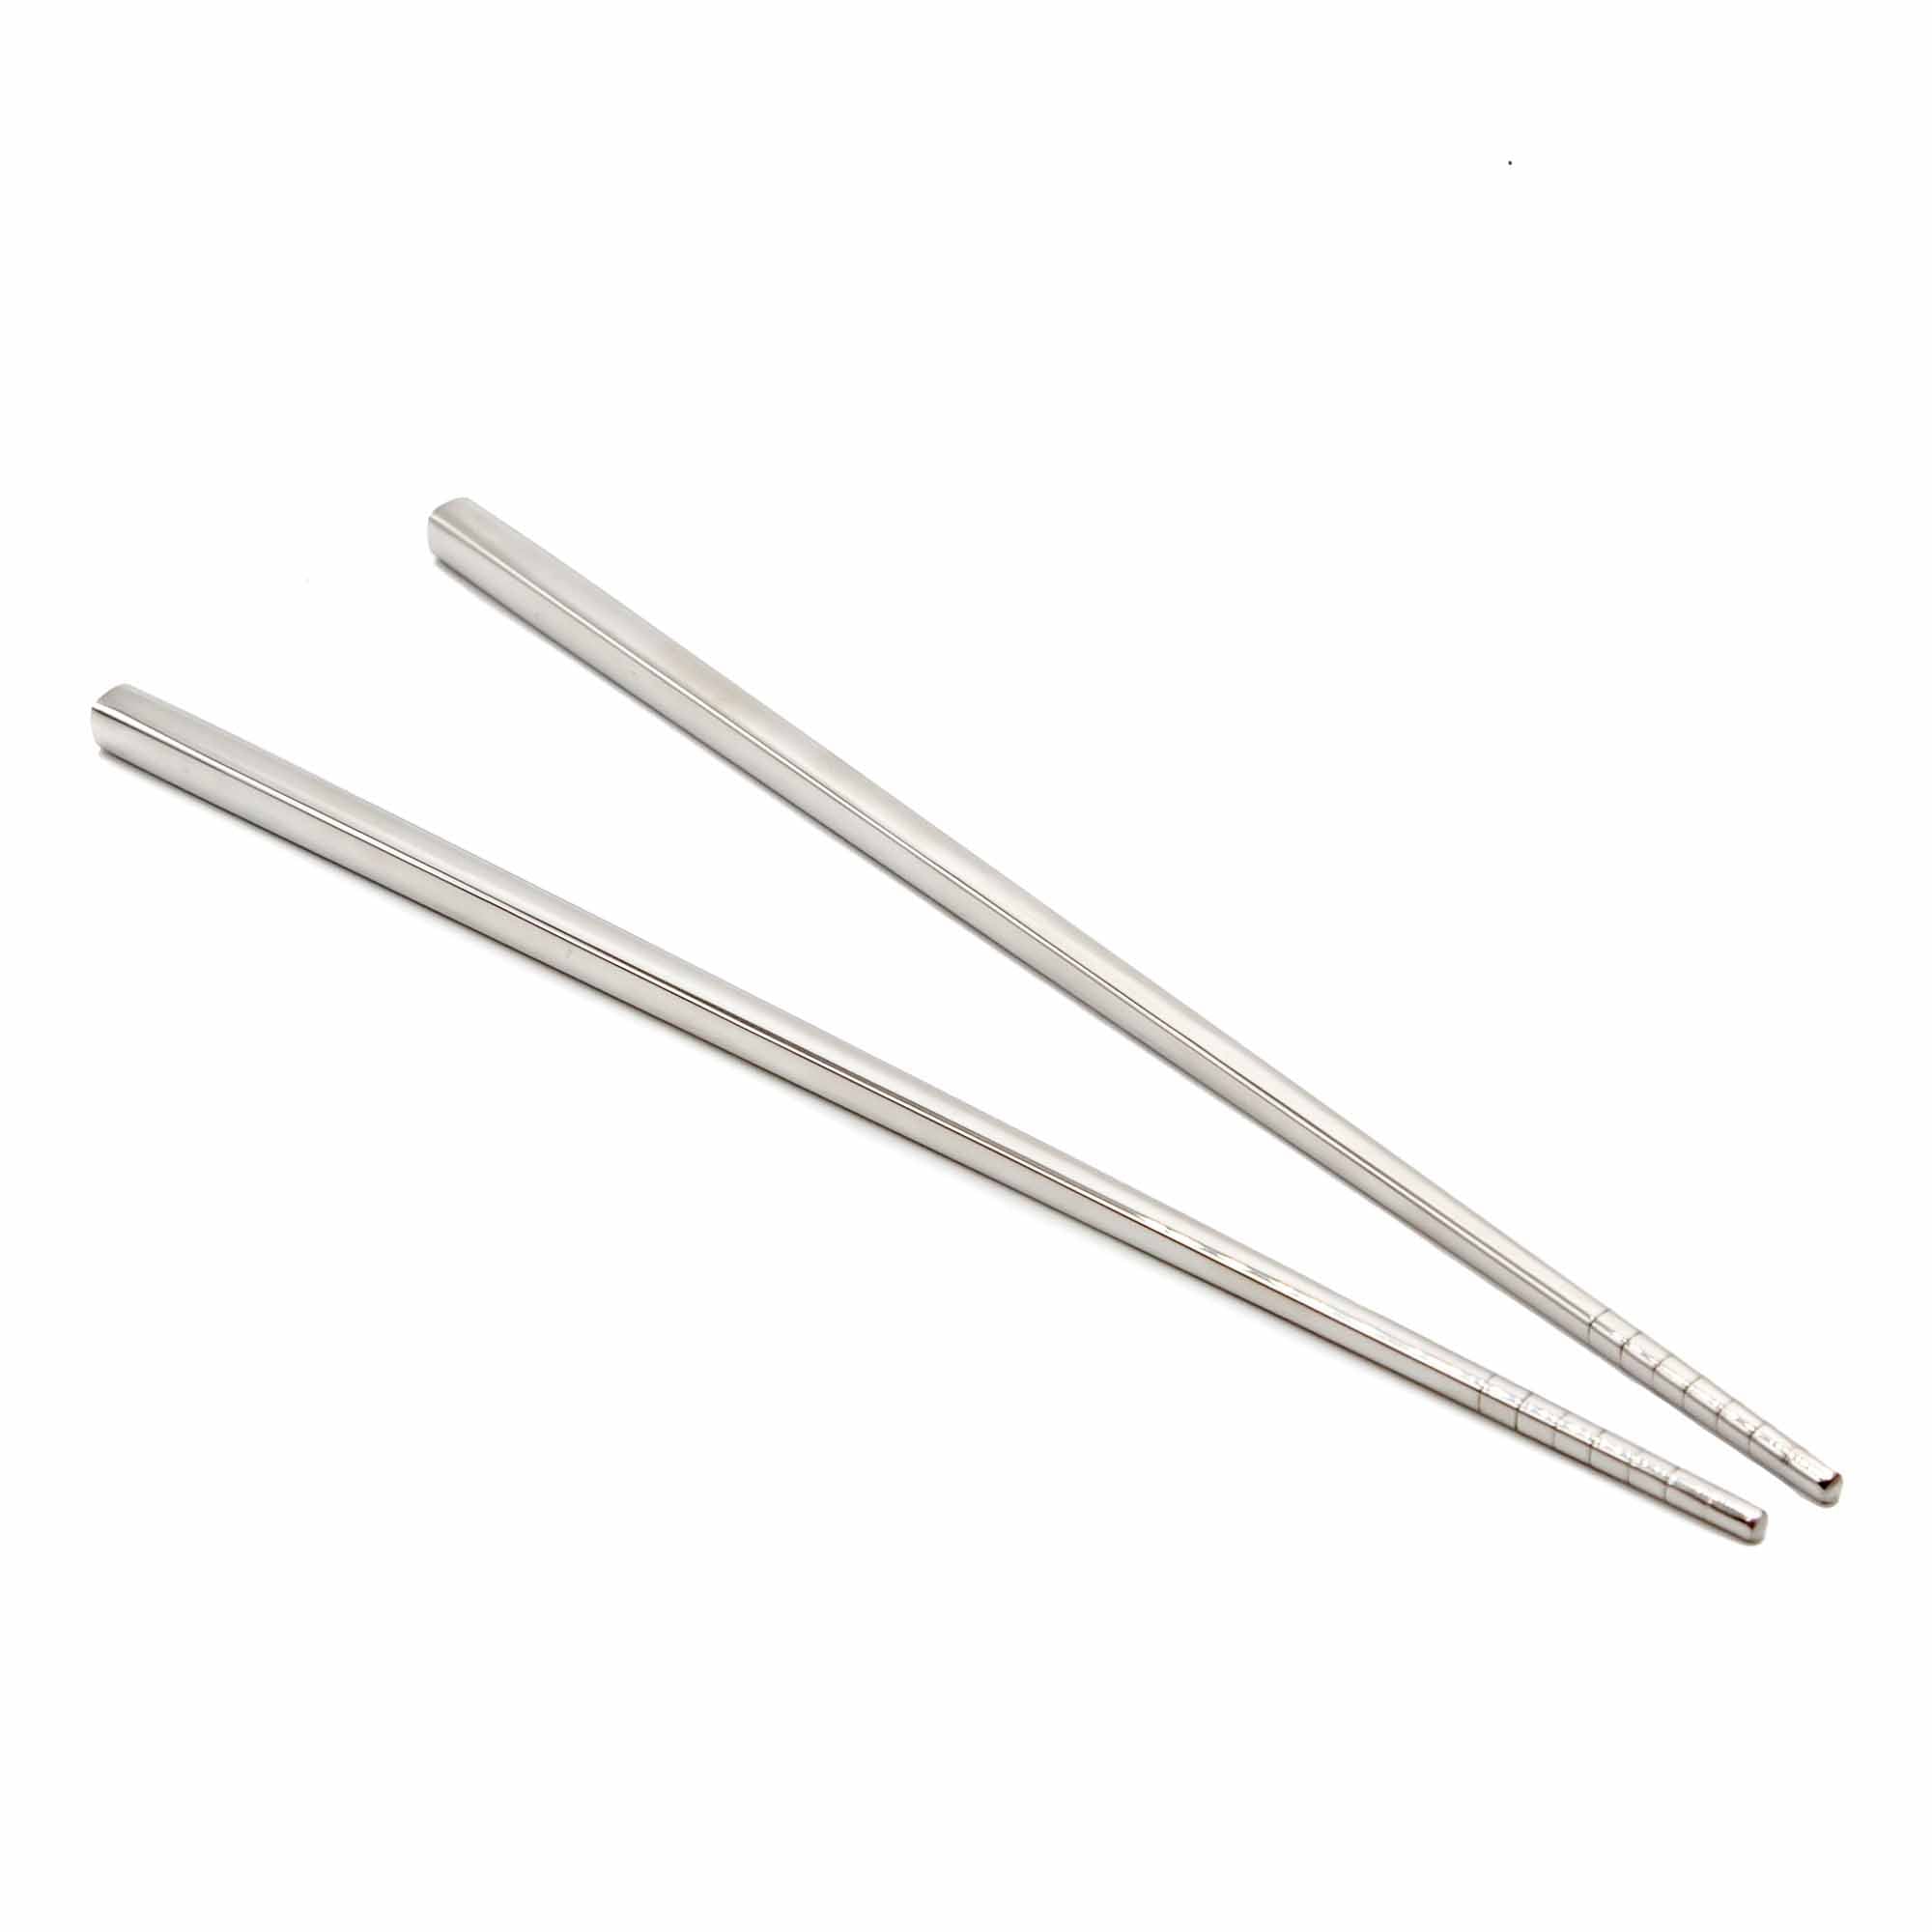 Natural’sace - Stainless Steel Pair of Chopsticks - Mortise And Tenon